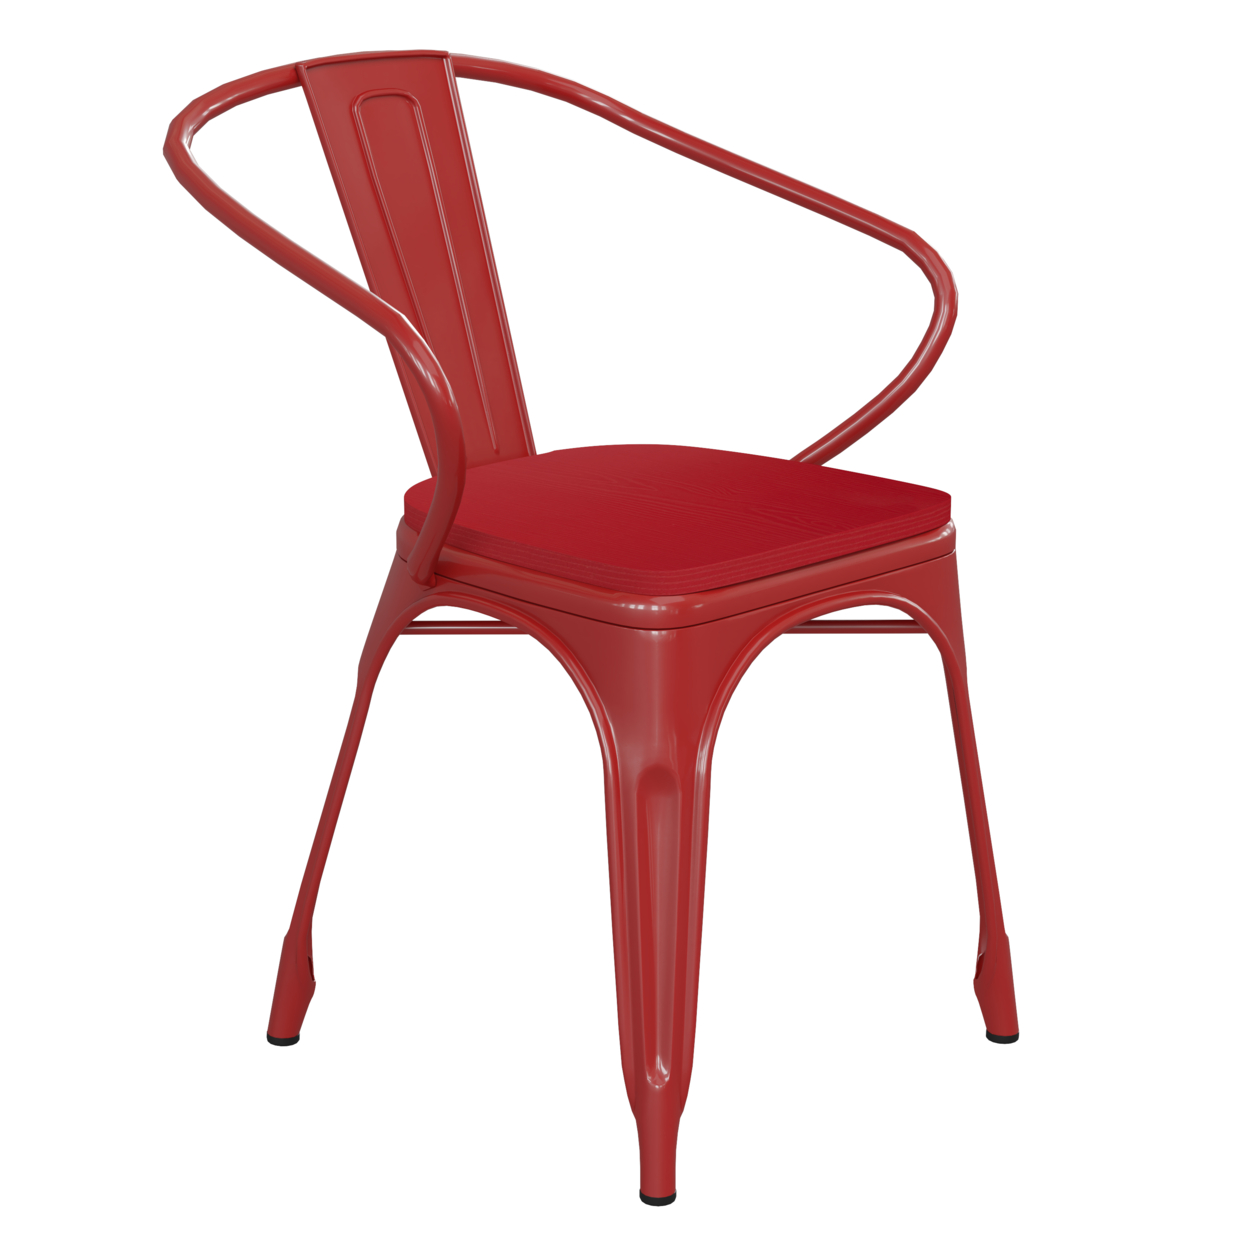 Metal Chair, Open Design Curved Arms, Polyresin Wood Seat, Maroon